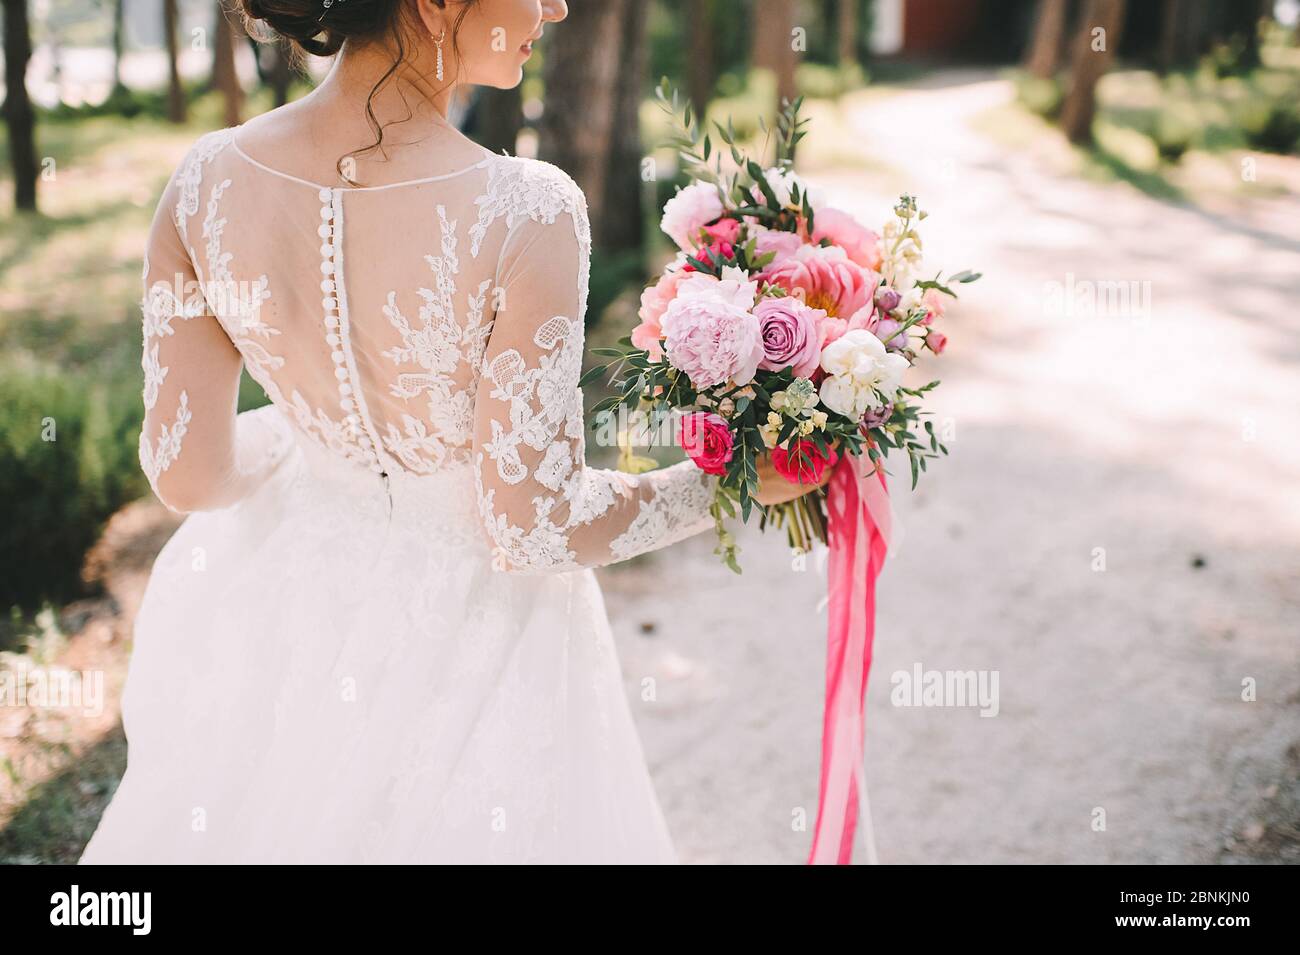 Close-up of a bride's bouquet of peonies, roses, eucalyptus in white-pink shades tied with pink ribbons. The bride holds a bouquet in her hand in a wh Stock Photo